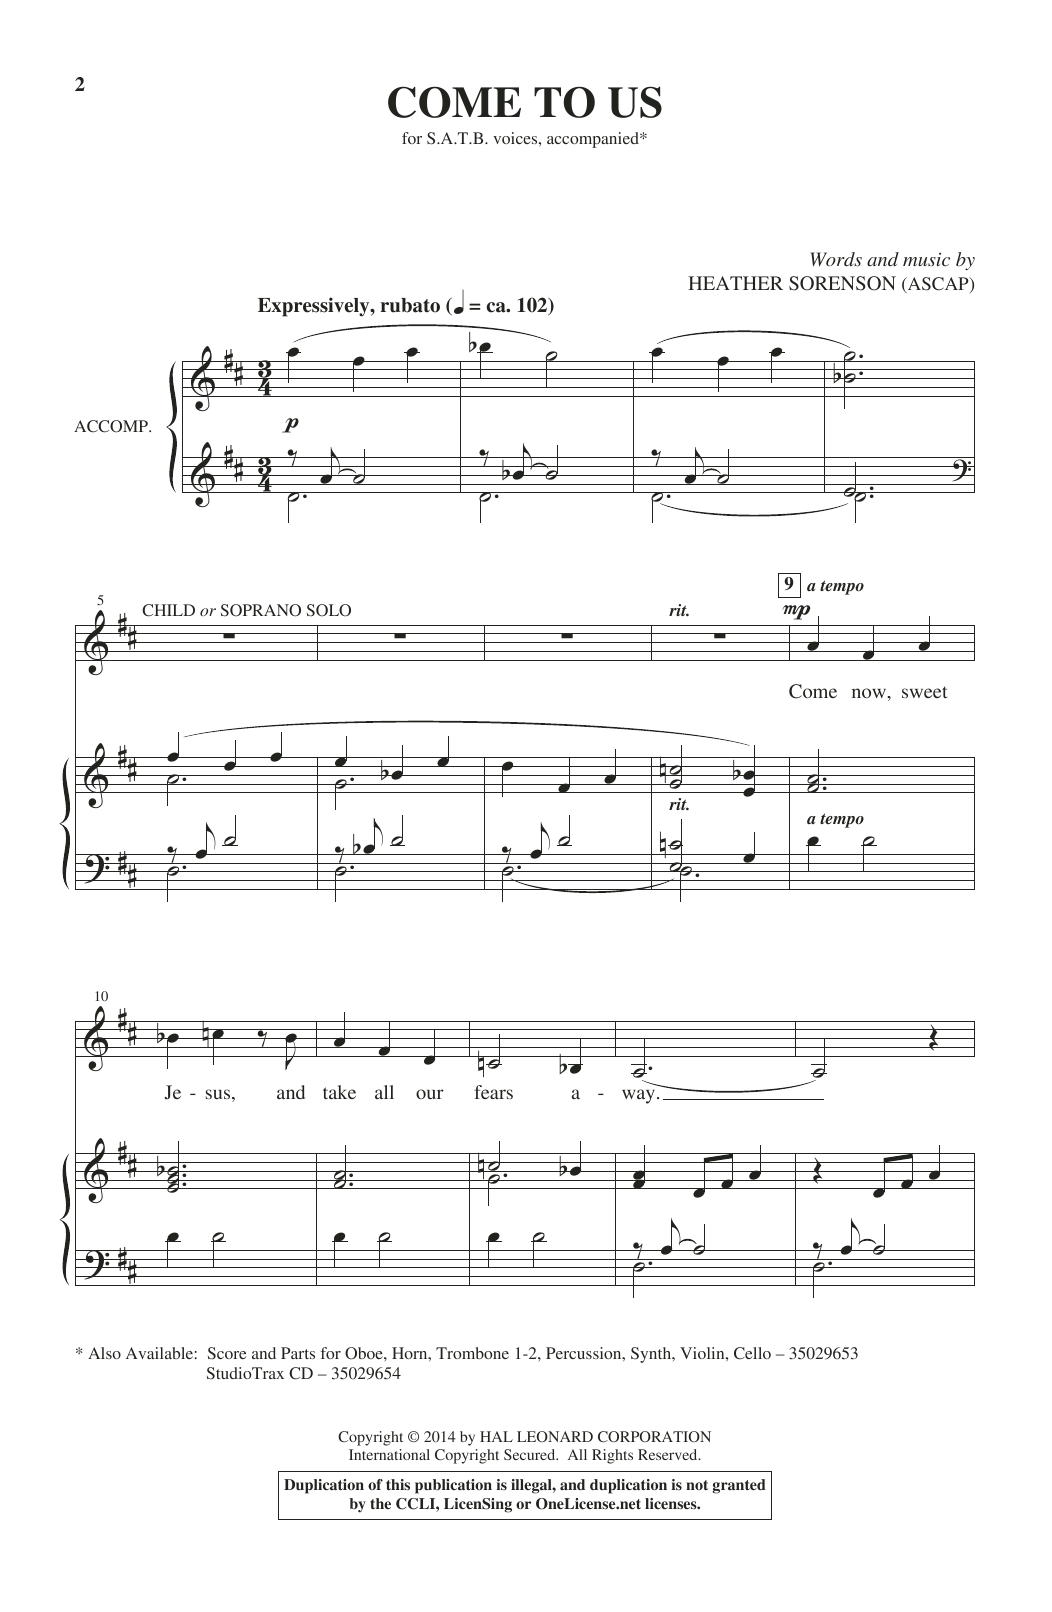 Download Heather Sorenson Come To Us Sheet Music